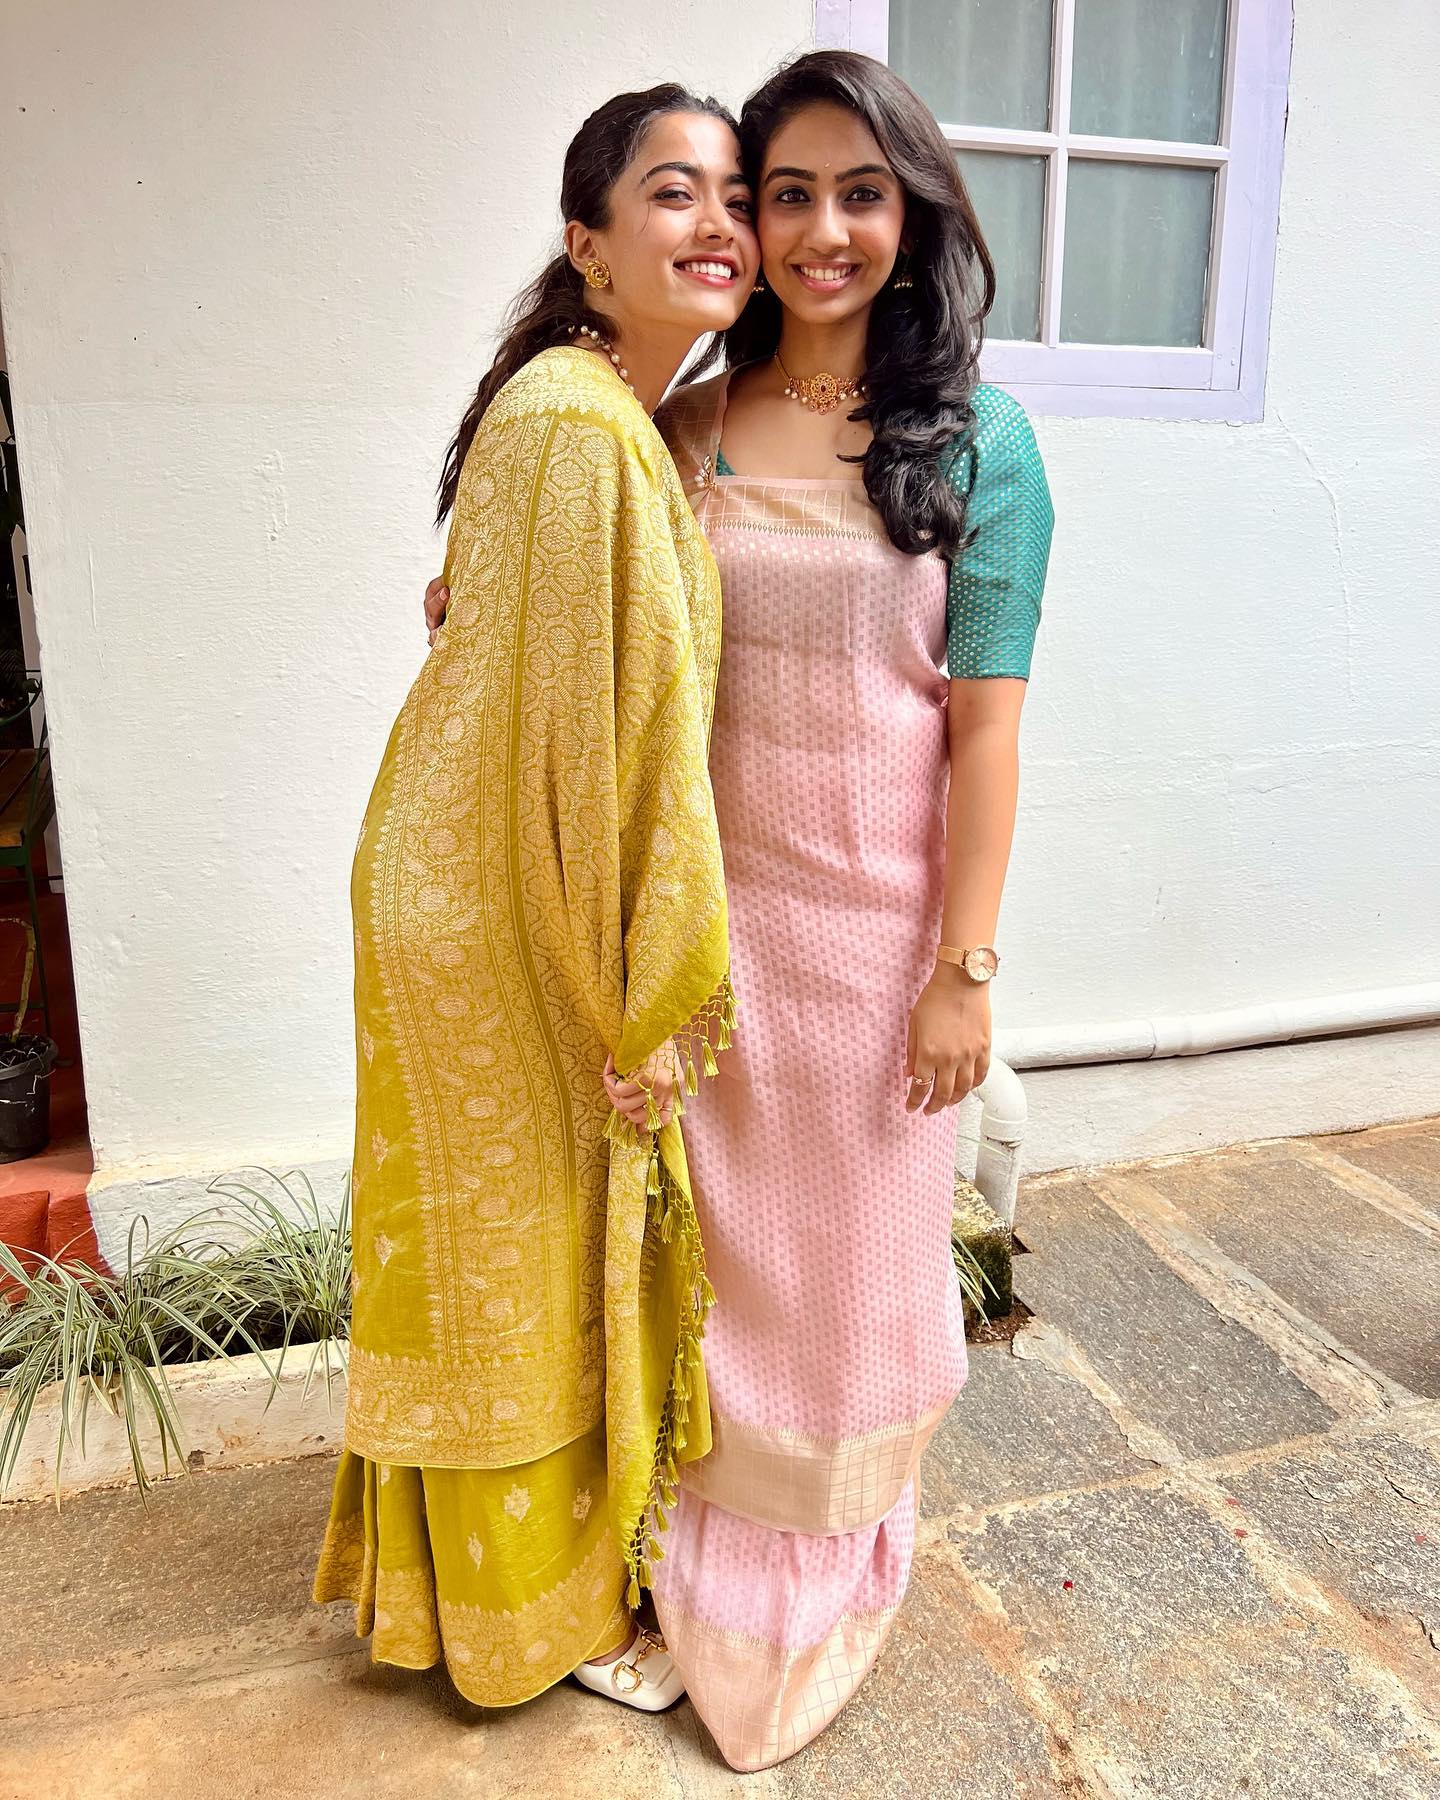 281142215 735311684139272 5802364269647278382 n Rashmika Mandanna attended her best friend's wedding as a bridesmaid, 'National crush' robbed the gathering in Kodava sari